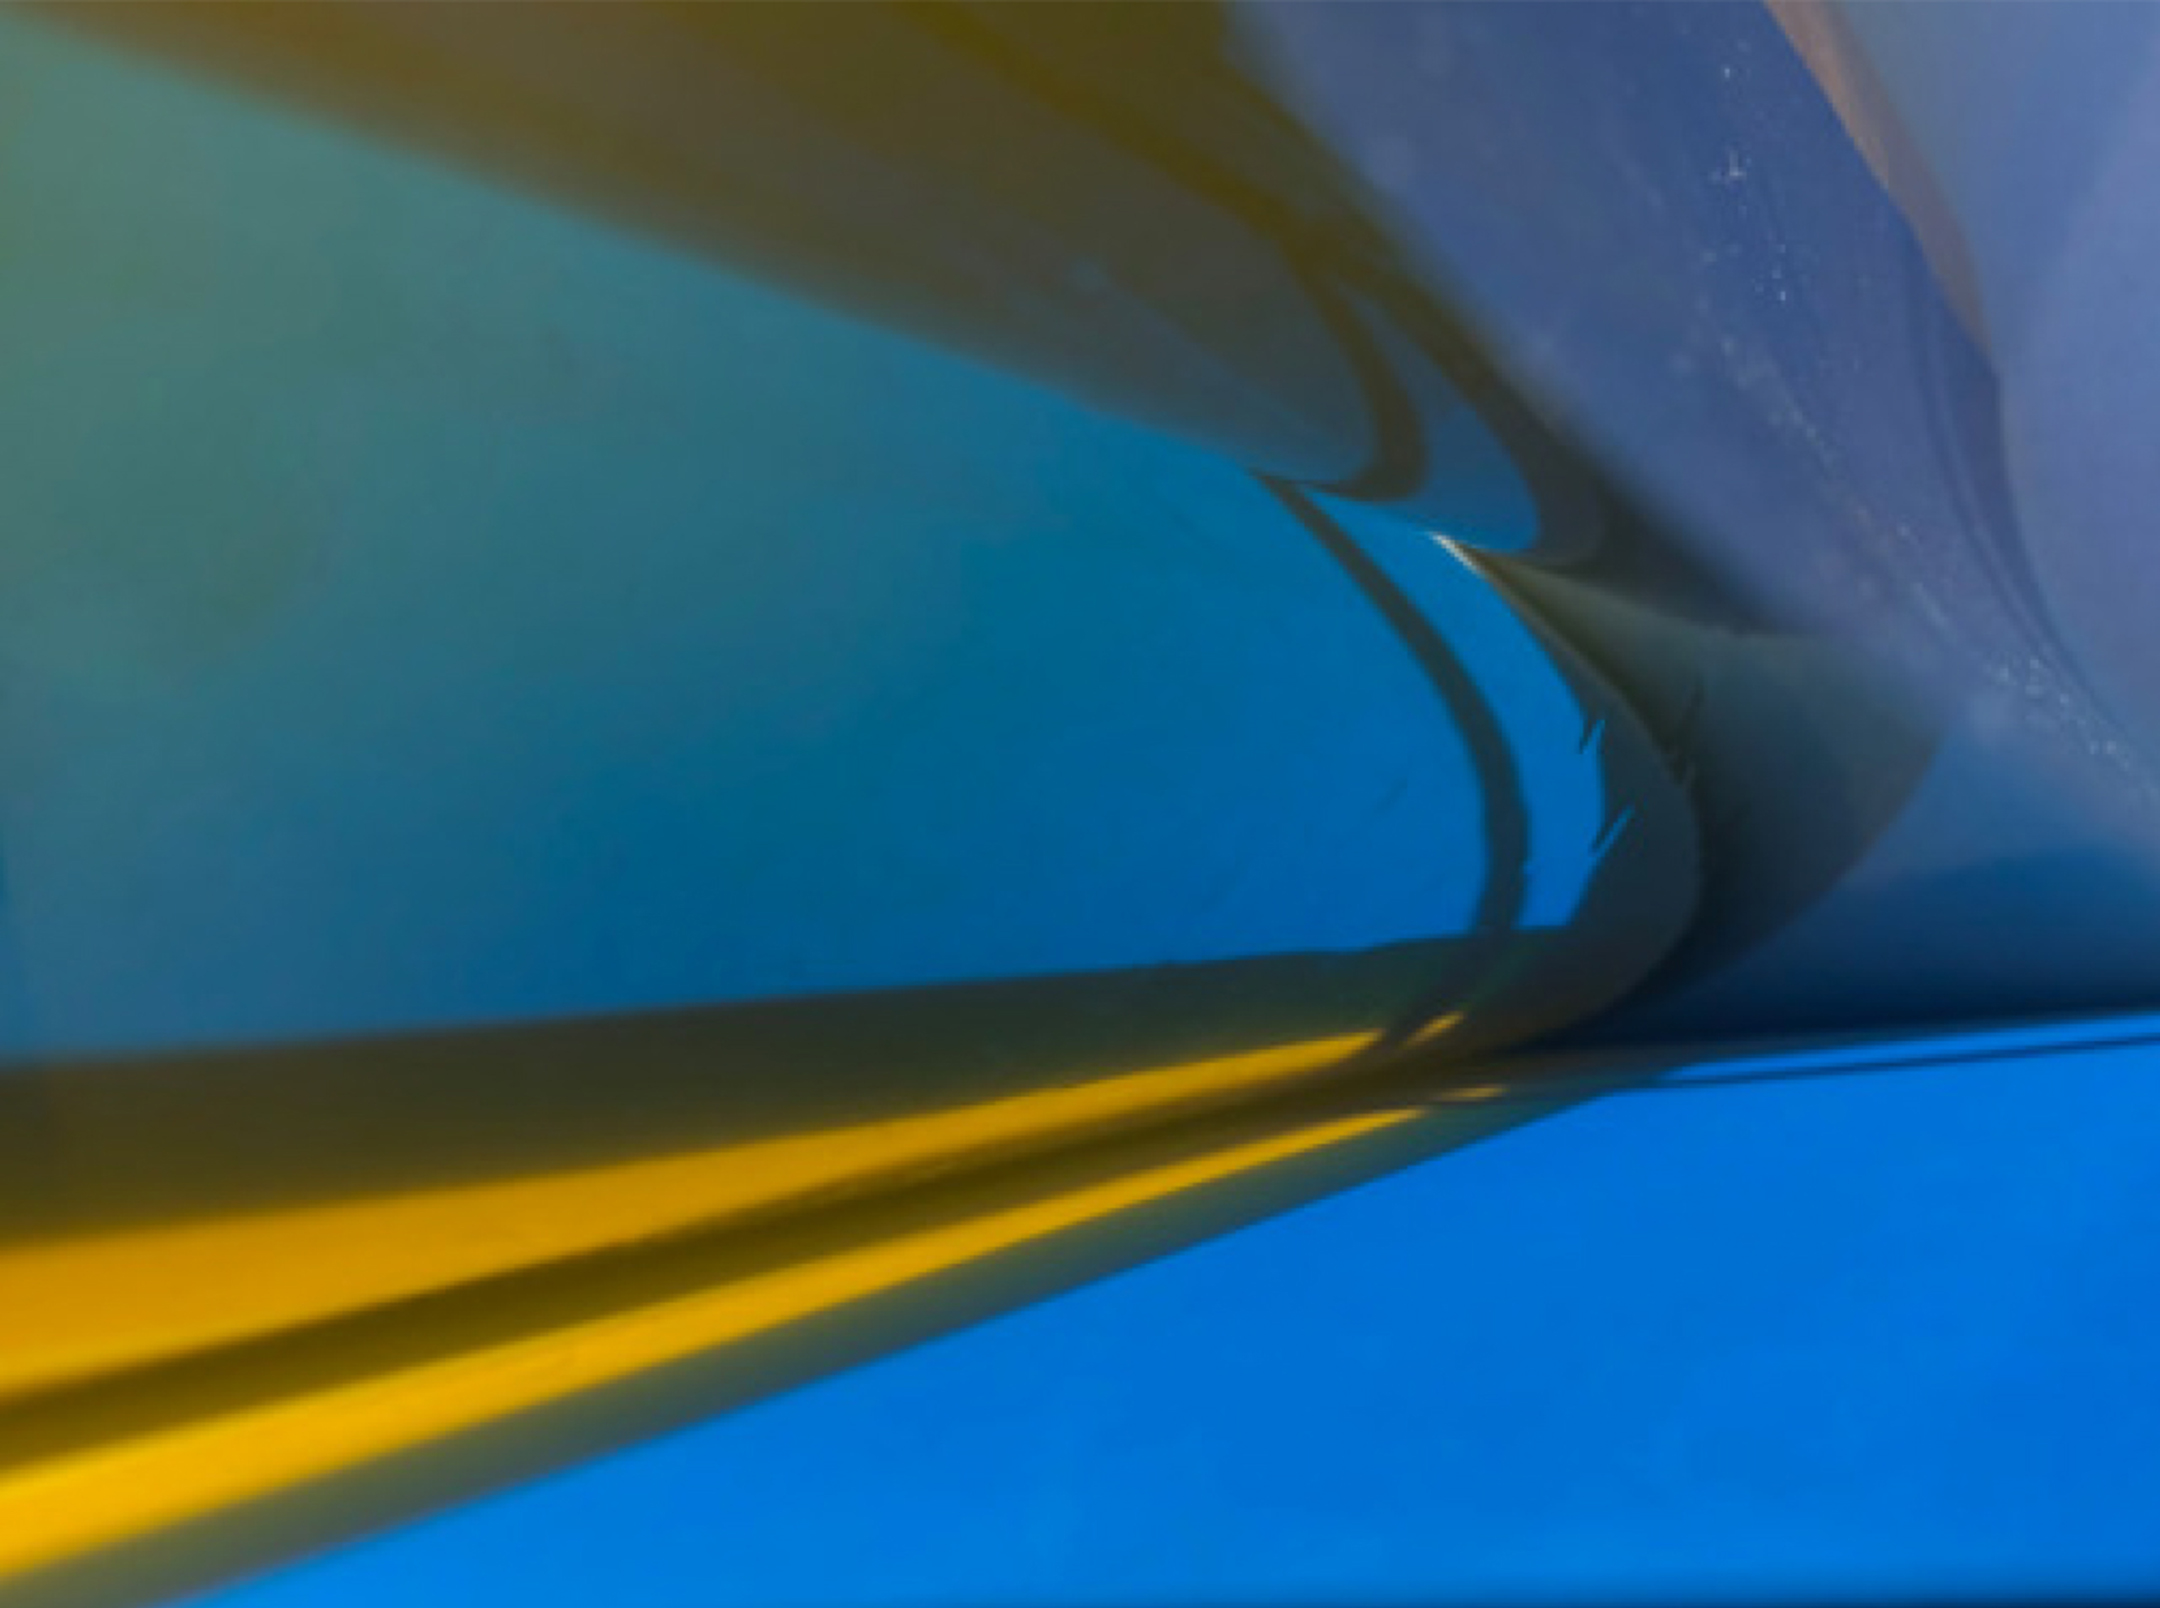 Abstract image of a streak of yellow against a curvy blue background